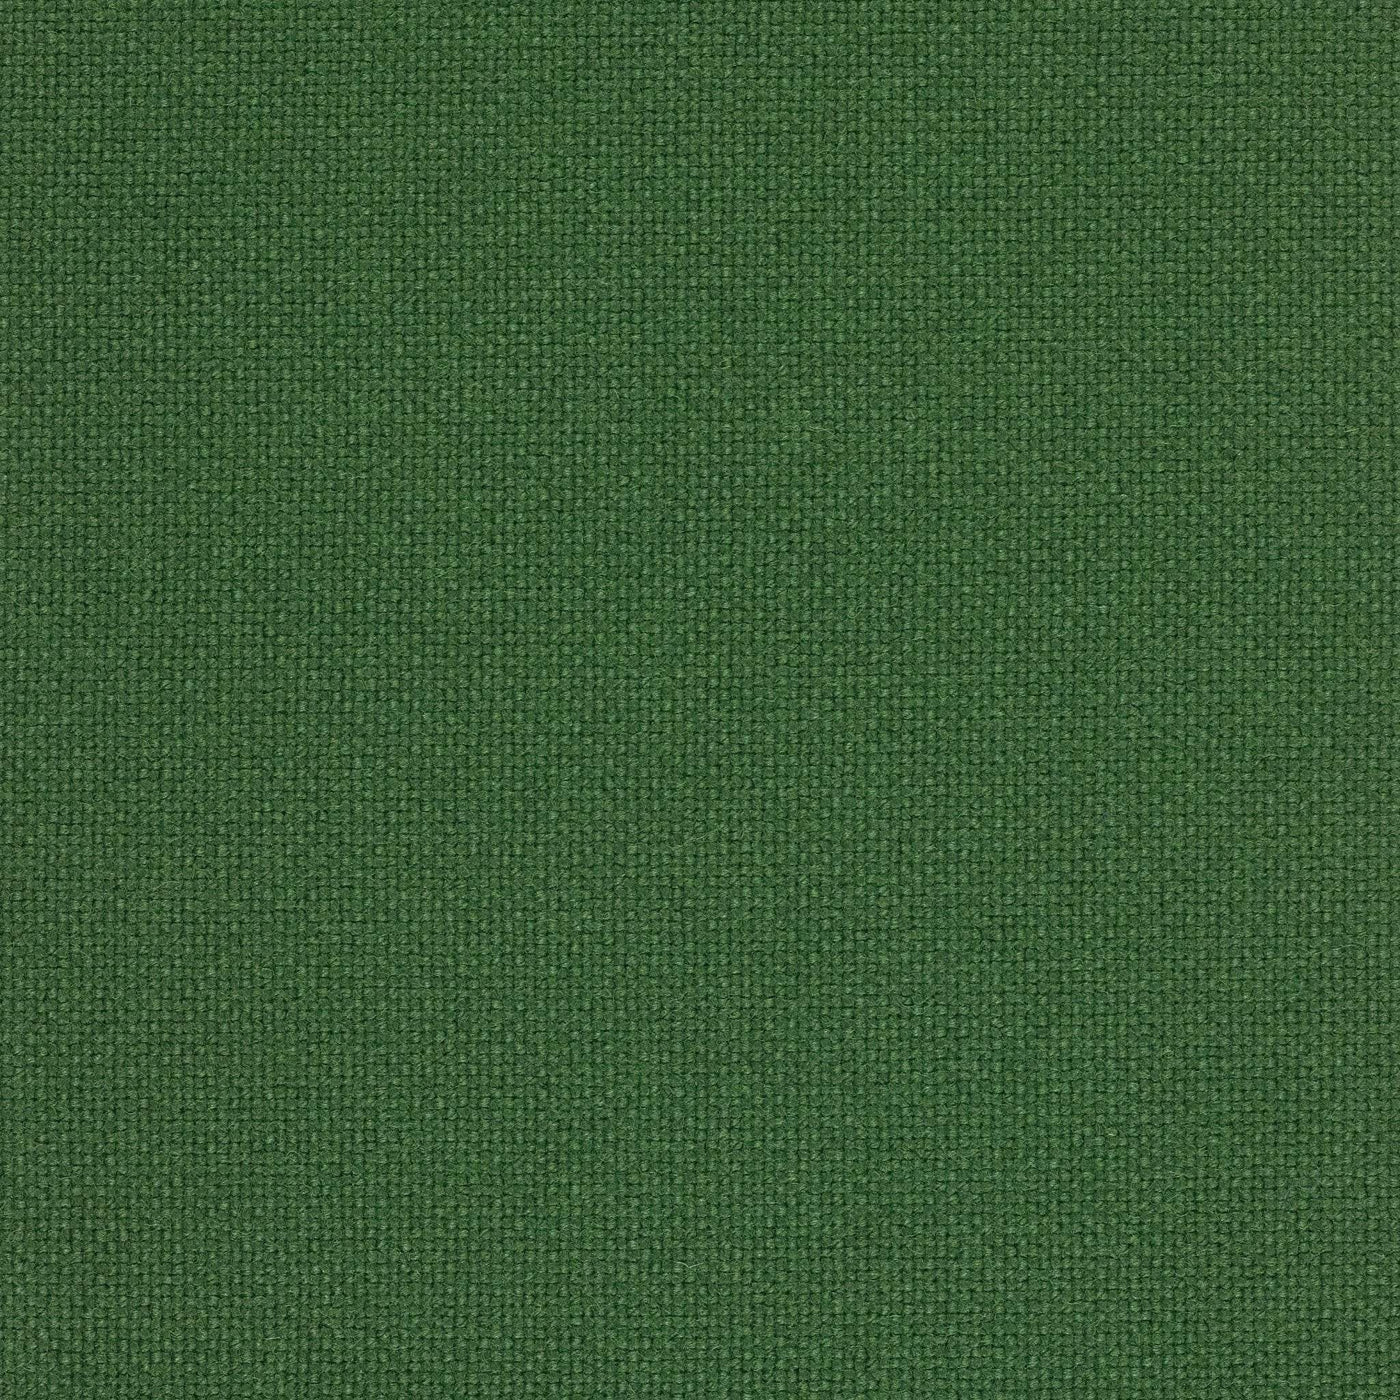 Hallingdal 944 by Kvadrat. Green upholstery fabric made to order for Muuto Outline sofas. Order free fabric swatches at someday designs.